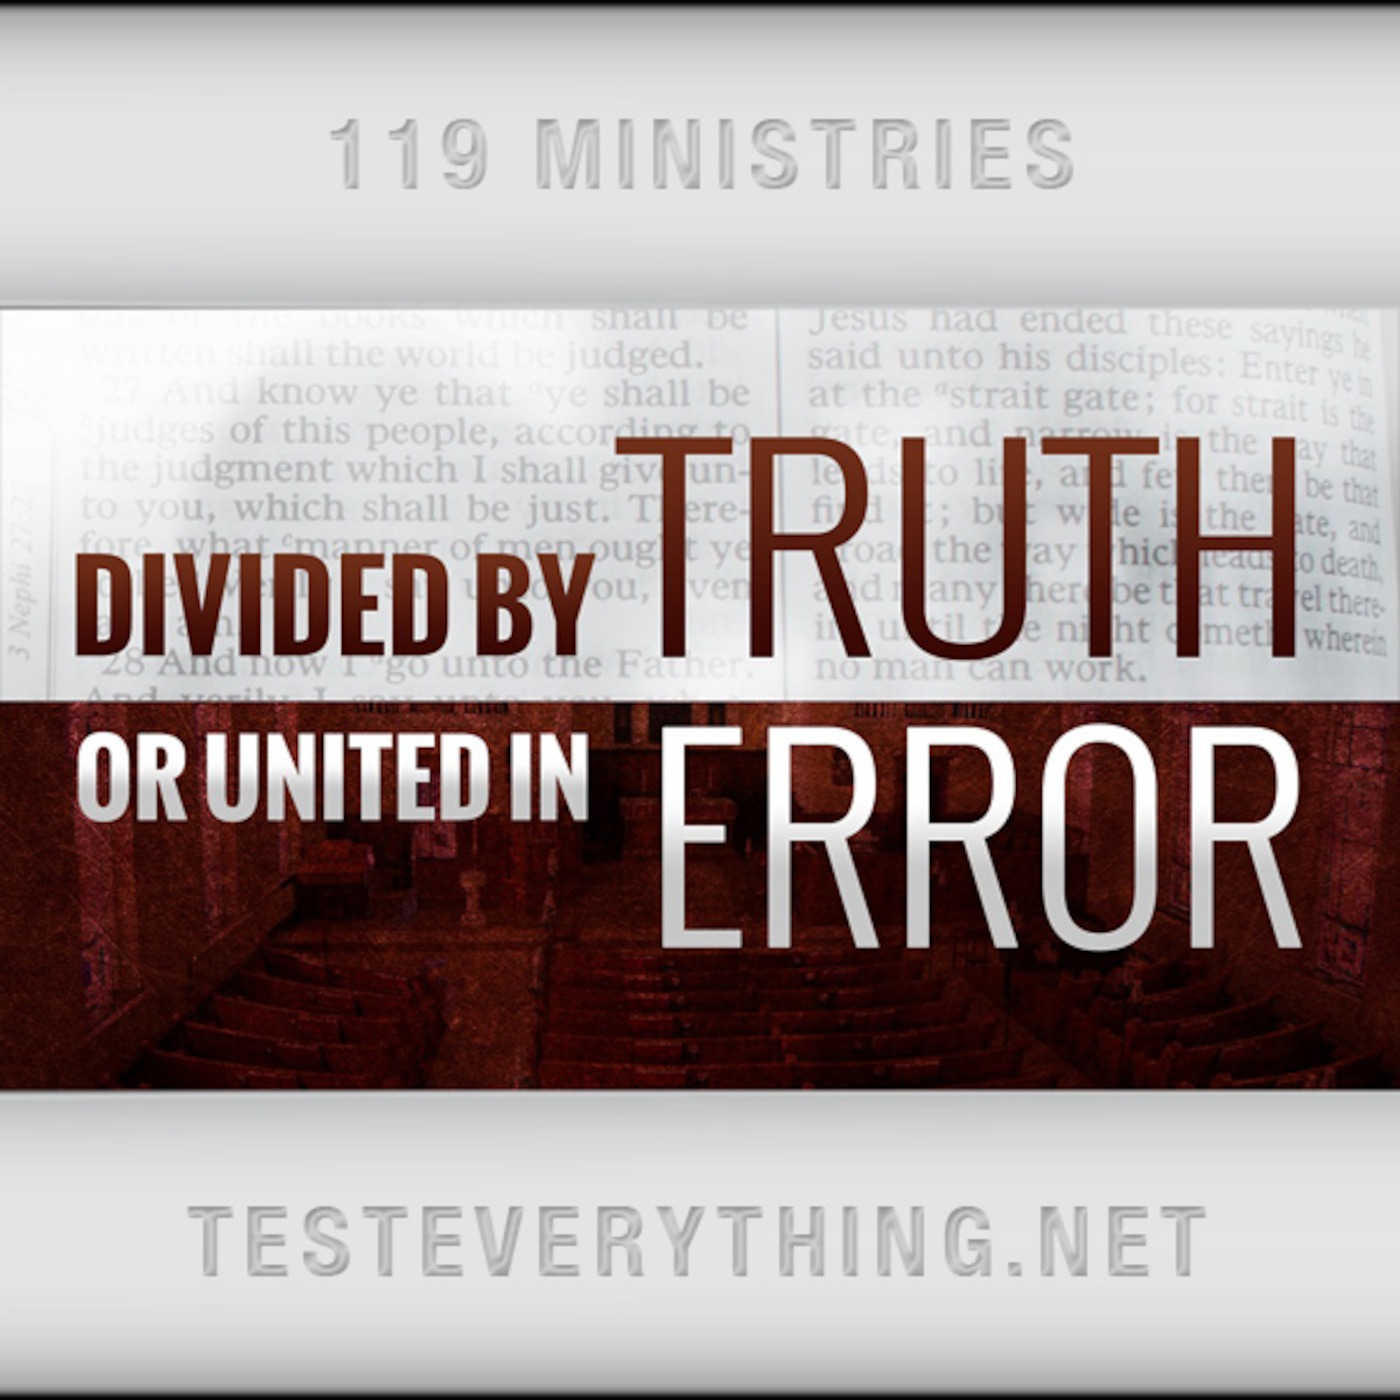 TE: Divided By Truth or United in Error